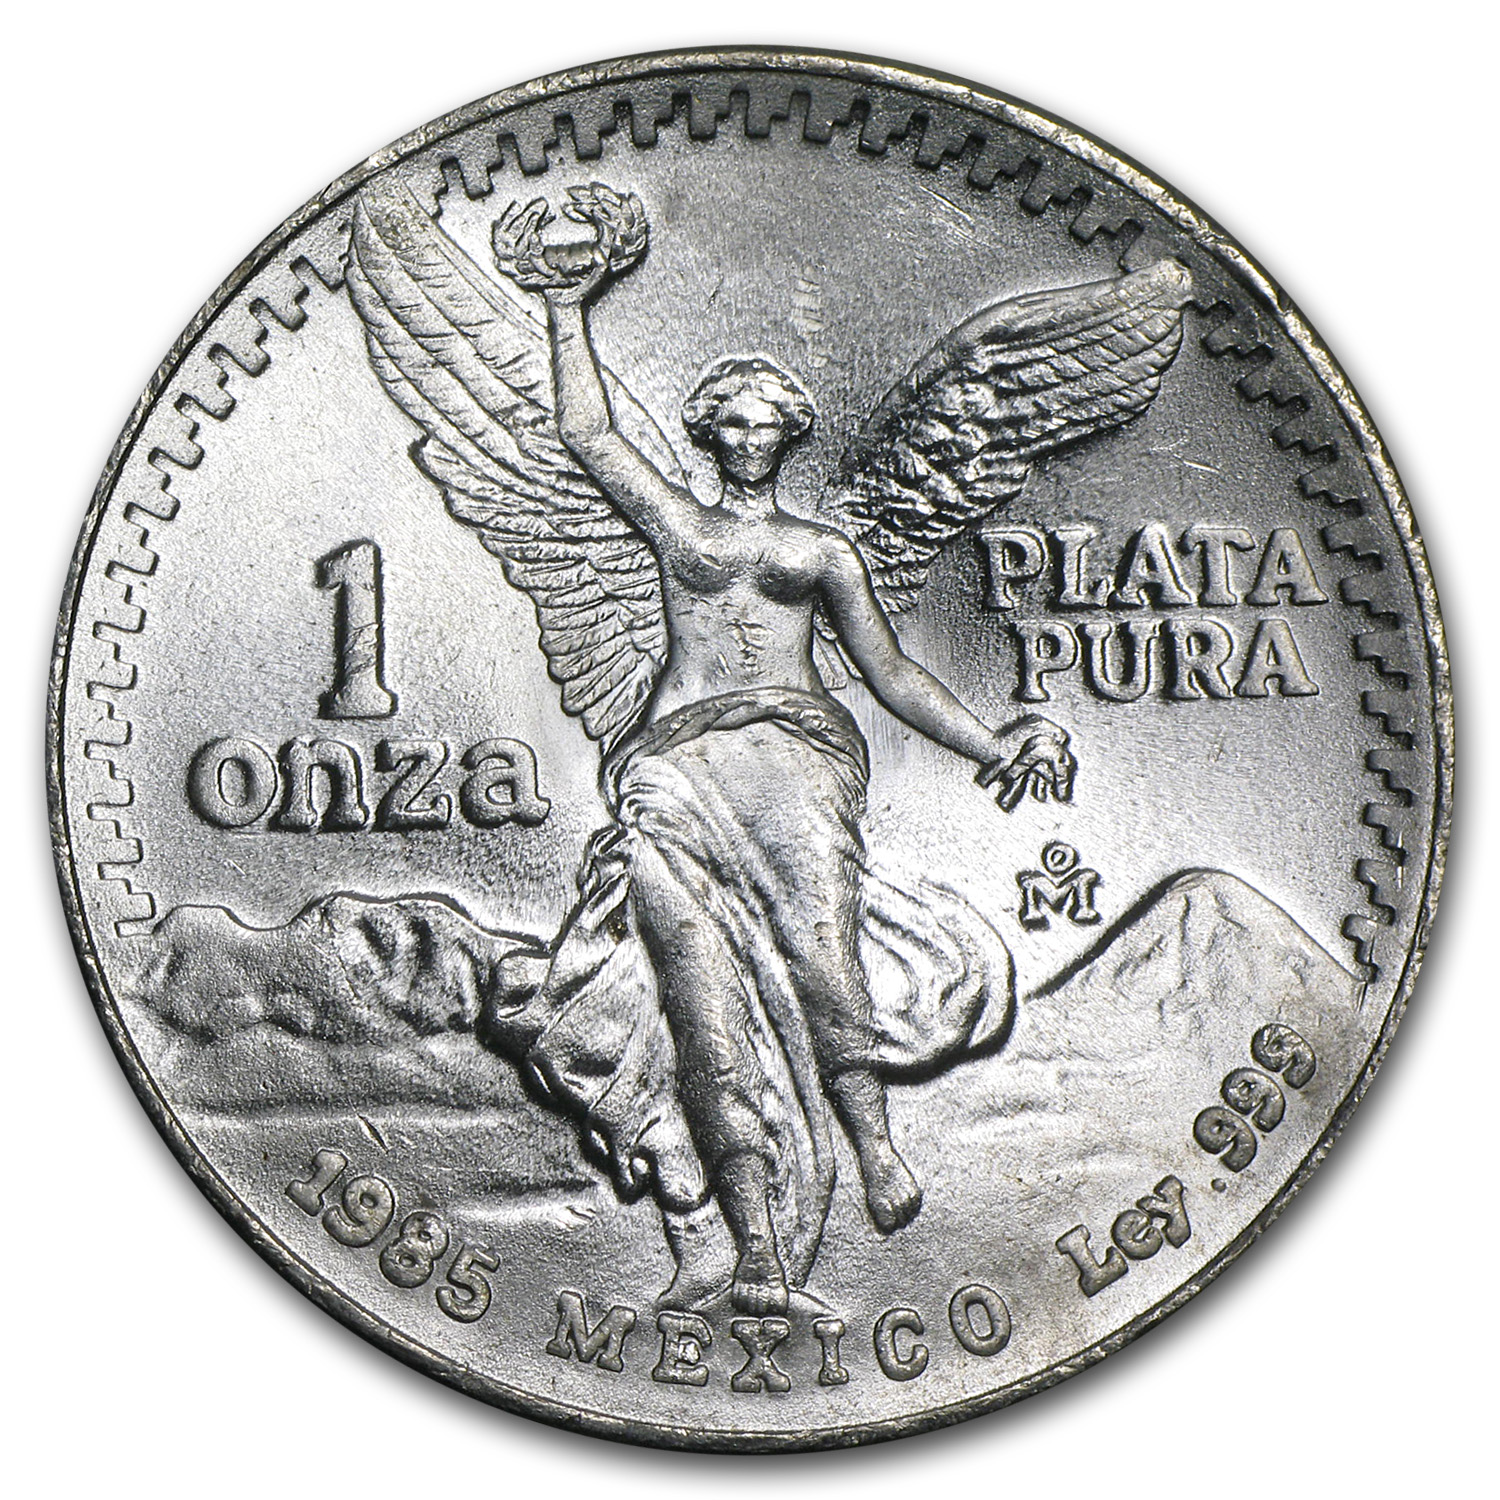 Details about   1985 Silver 1 OZ .999 Libertad Onza WINGED ANGEL SEALED Brilliant MS UNC Coin